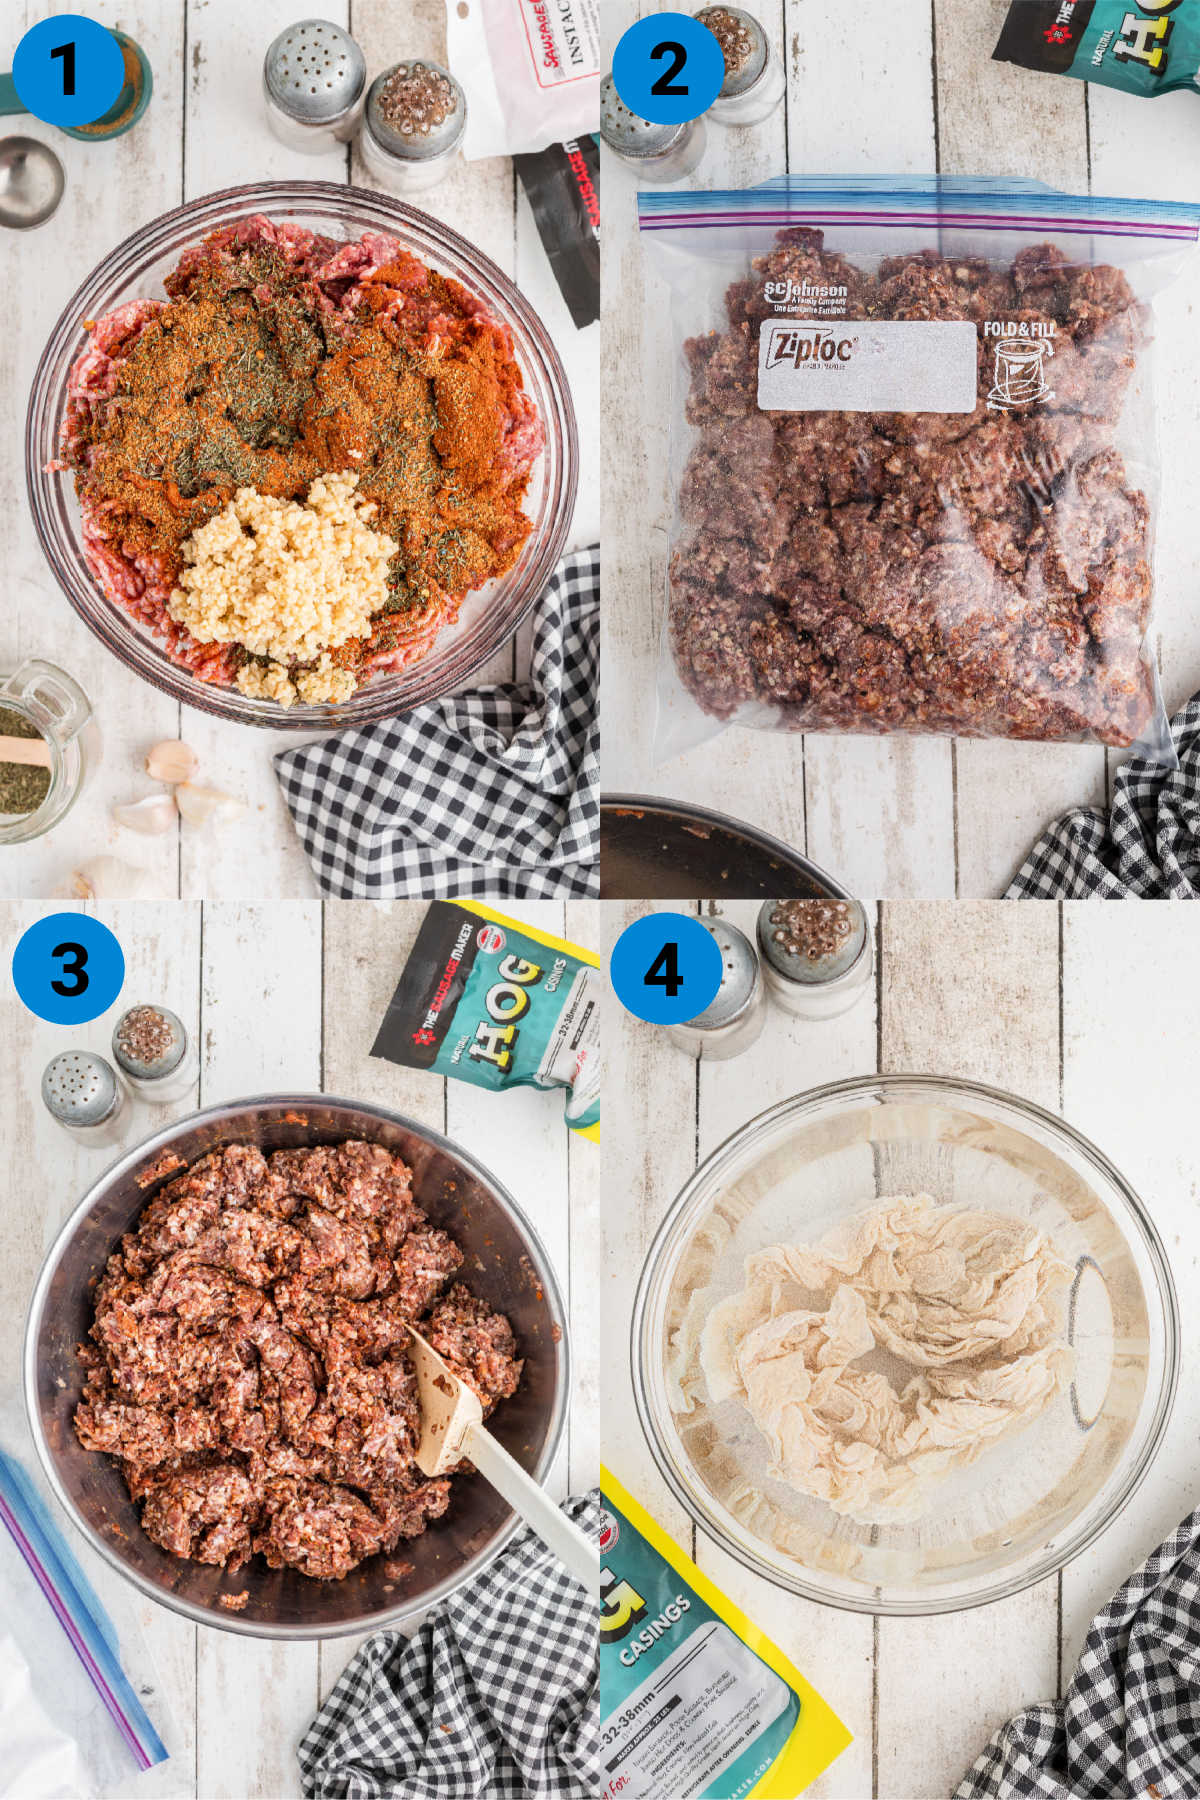 A collage of four images showing how to make andouille sausage, steps 1 through 4.